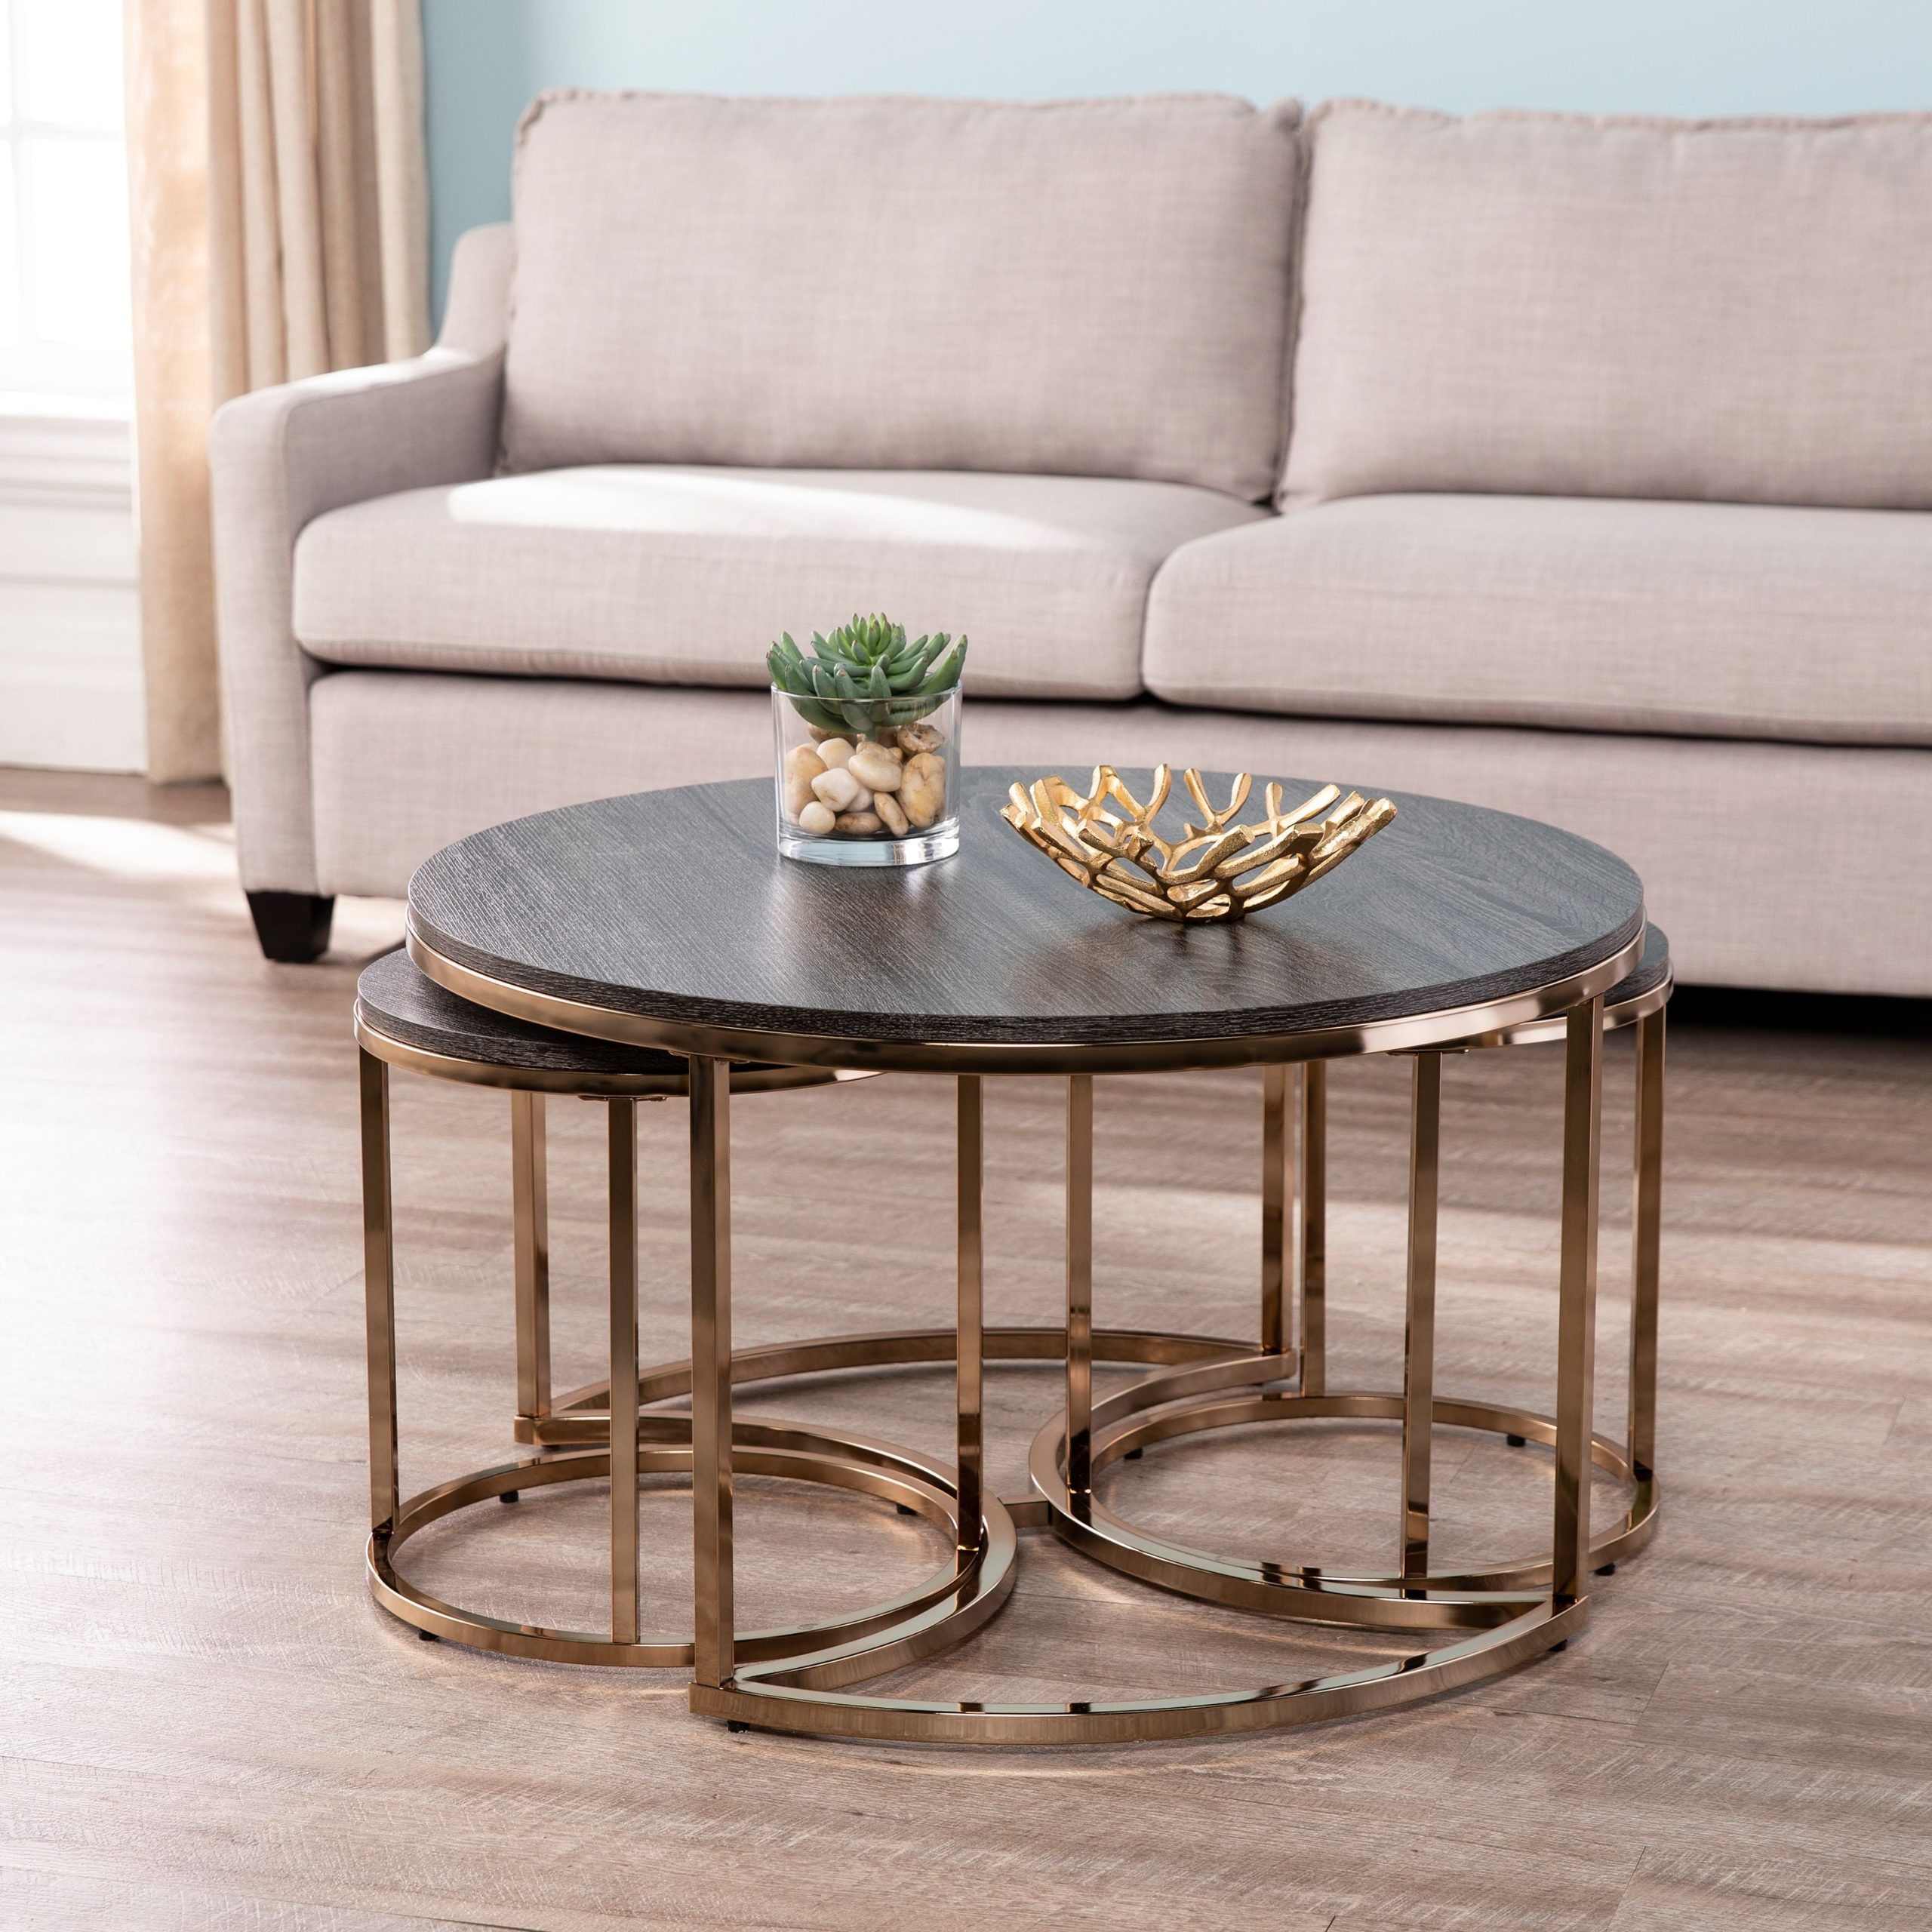 Ember Interiors Lokyle Metal And Wood Round Nesting Coffee Table, 3 Regarding Nesting Coffee Tables (View 2 of 20)